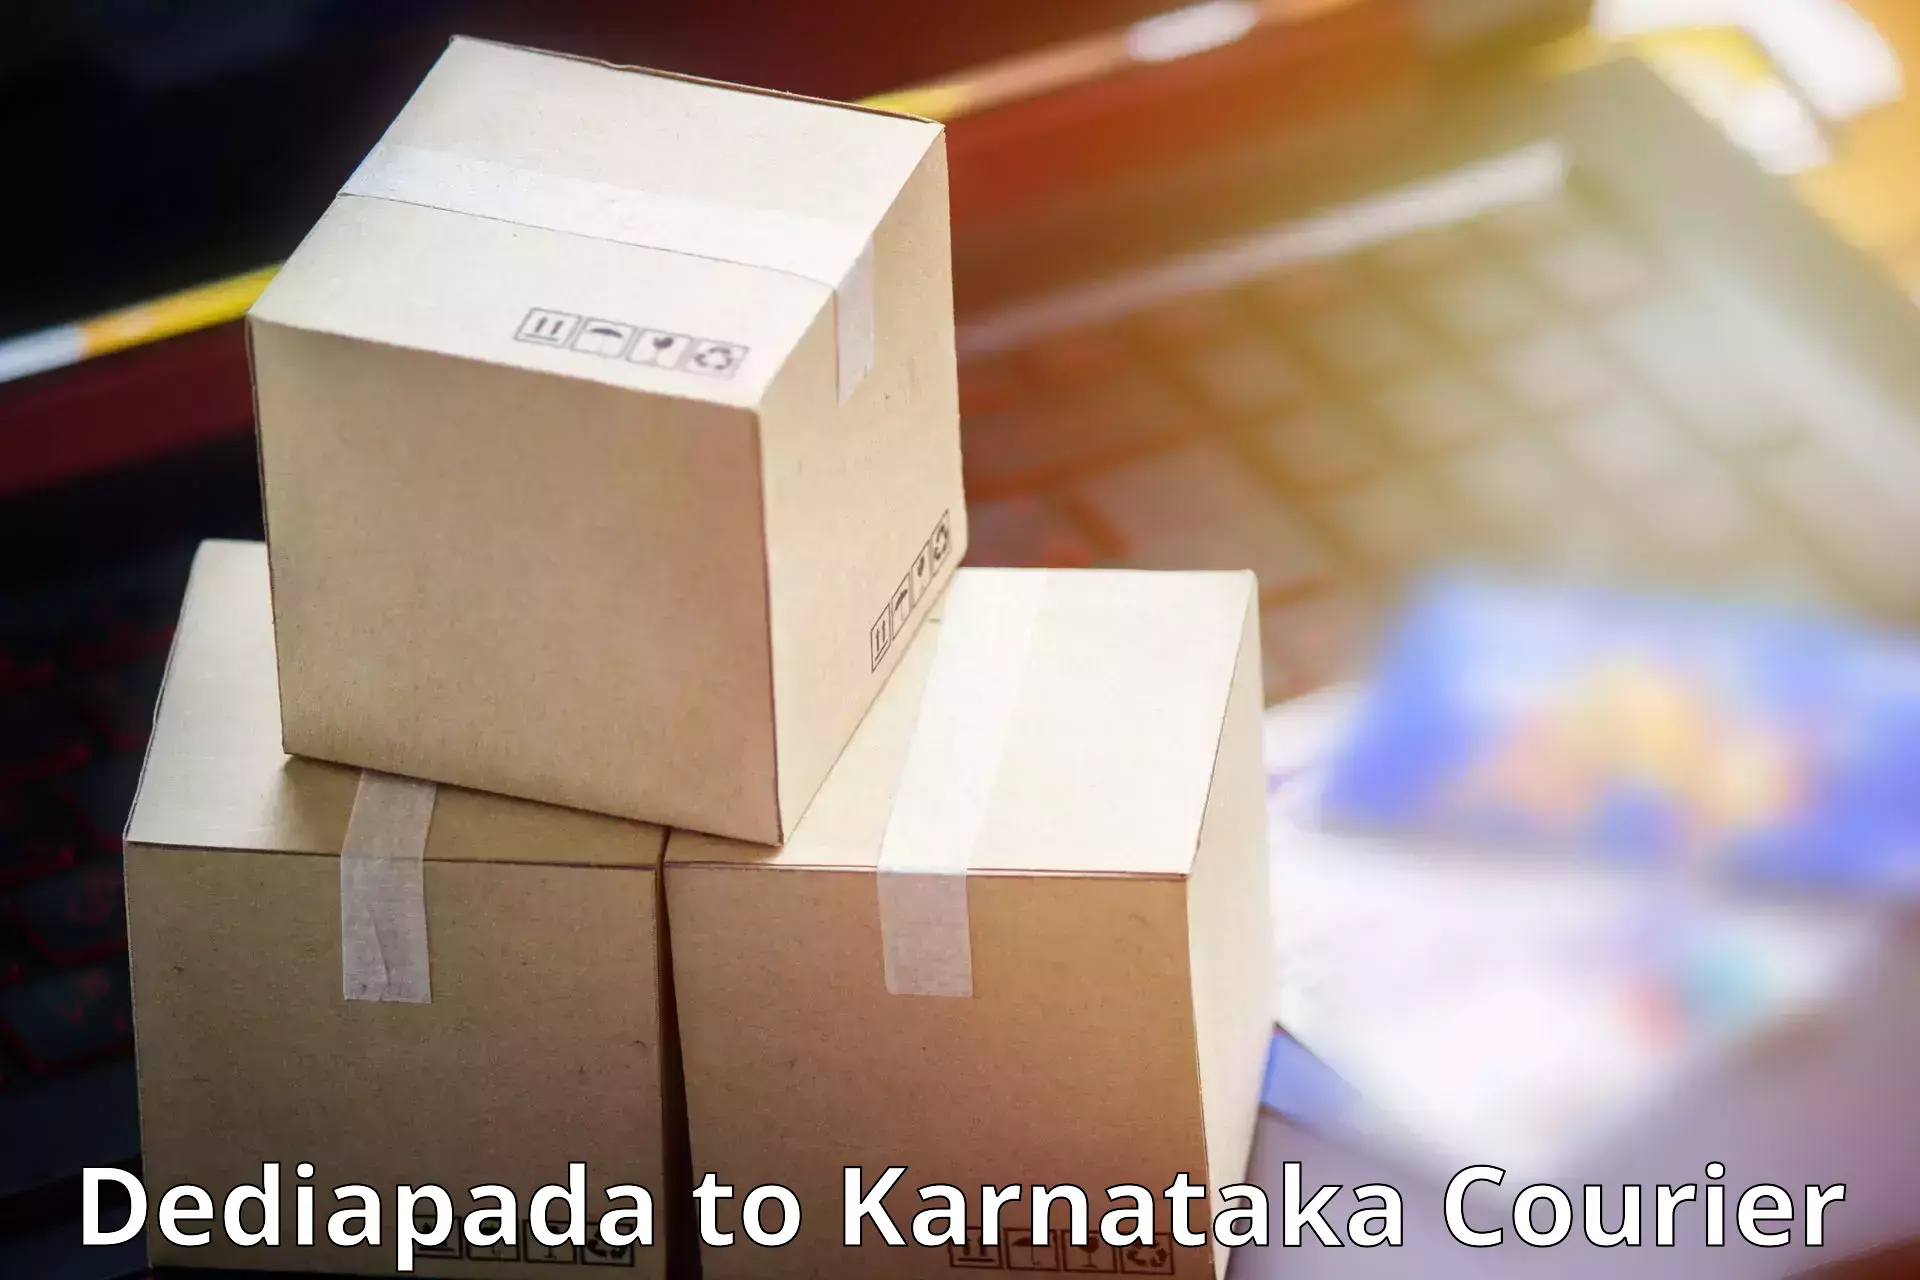 Reliable delivery network Dediapada to Chikkamagalur